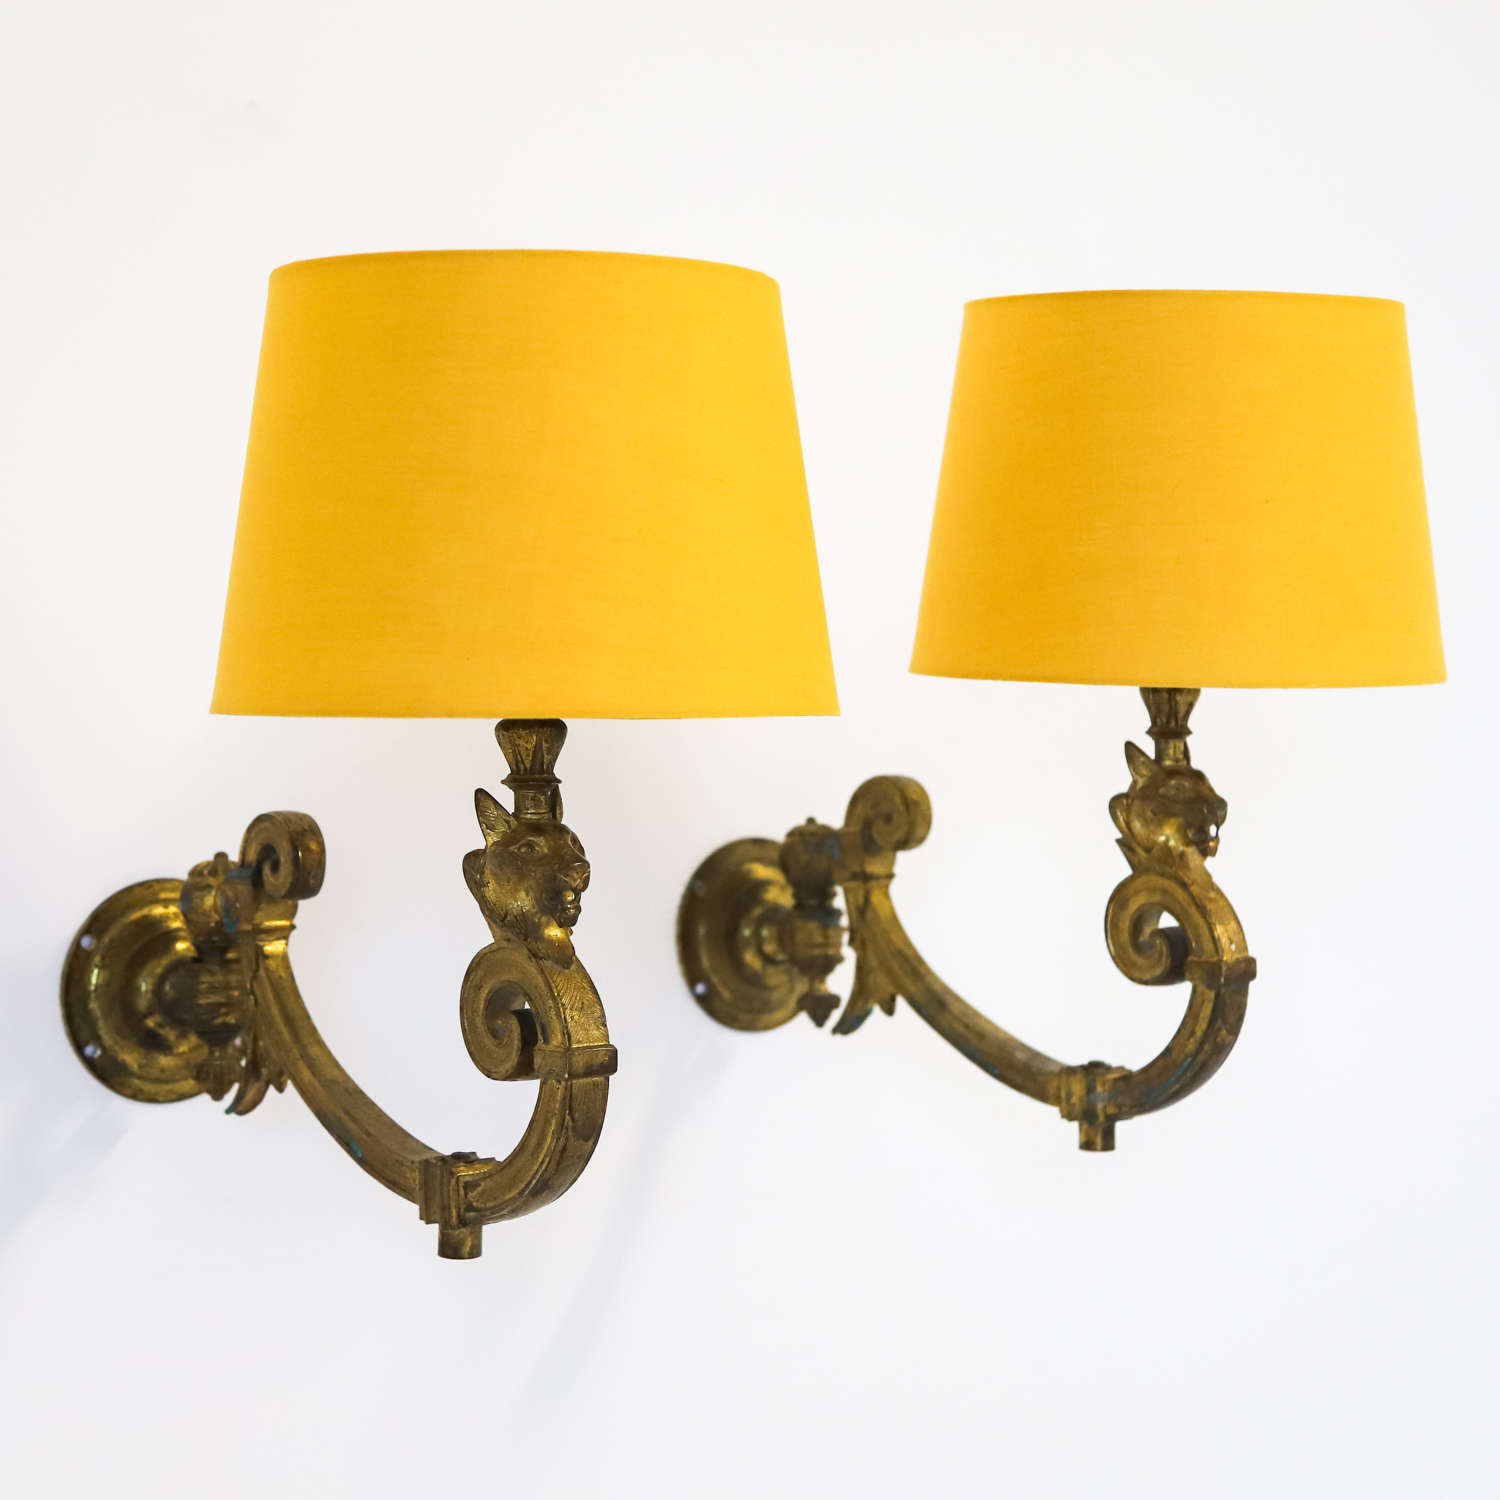 Pair of French 19th Century c1880 Egyptian Revival Wall Lights